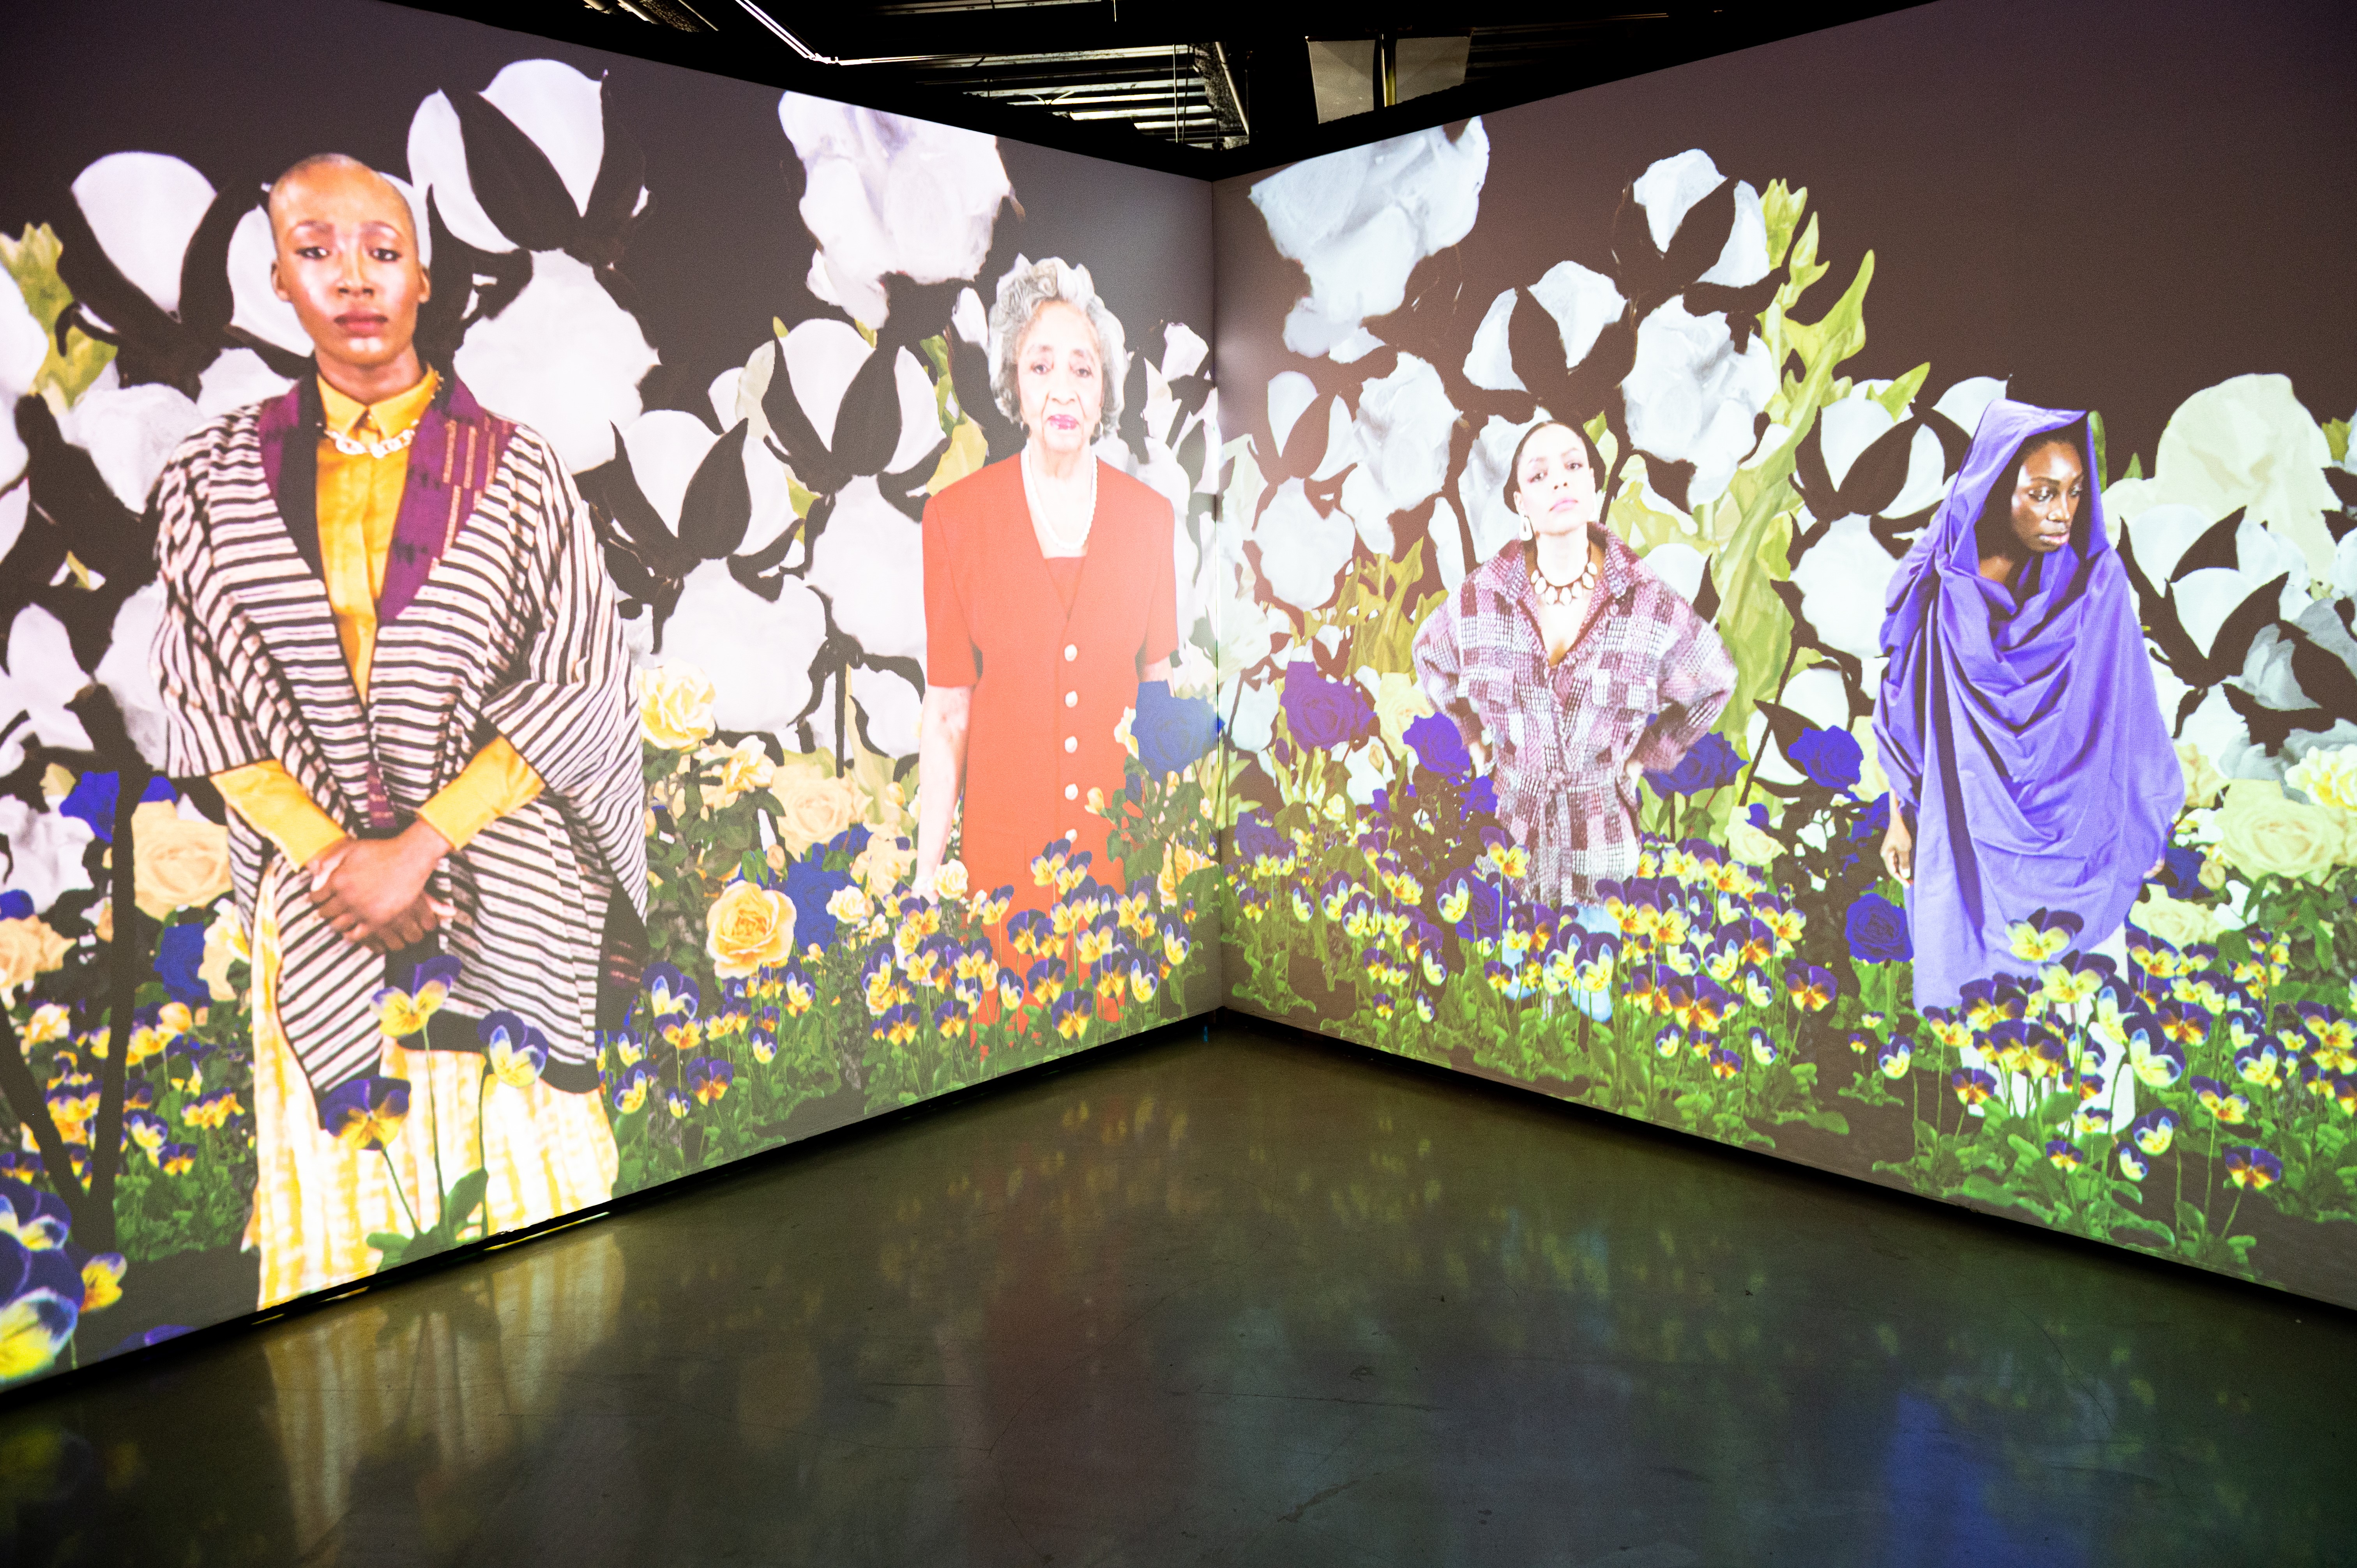 Video installation along two gallery walls depicts 4 women of color with various skin tones, age, and clothing surrounded by digital flowers & plants.